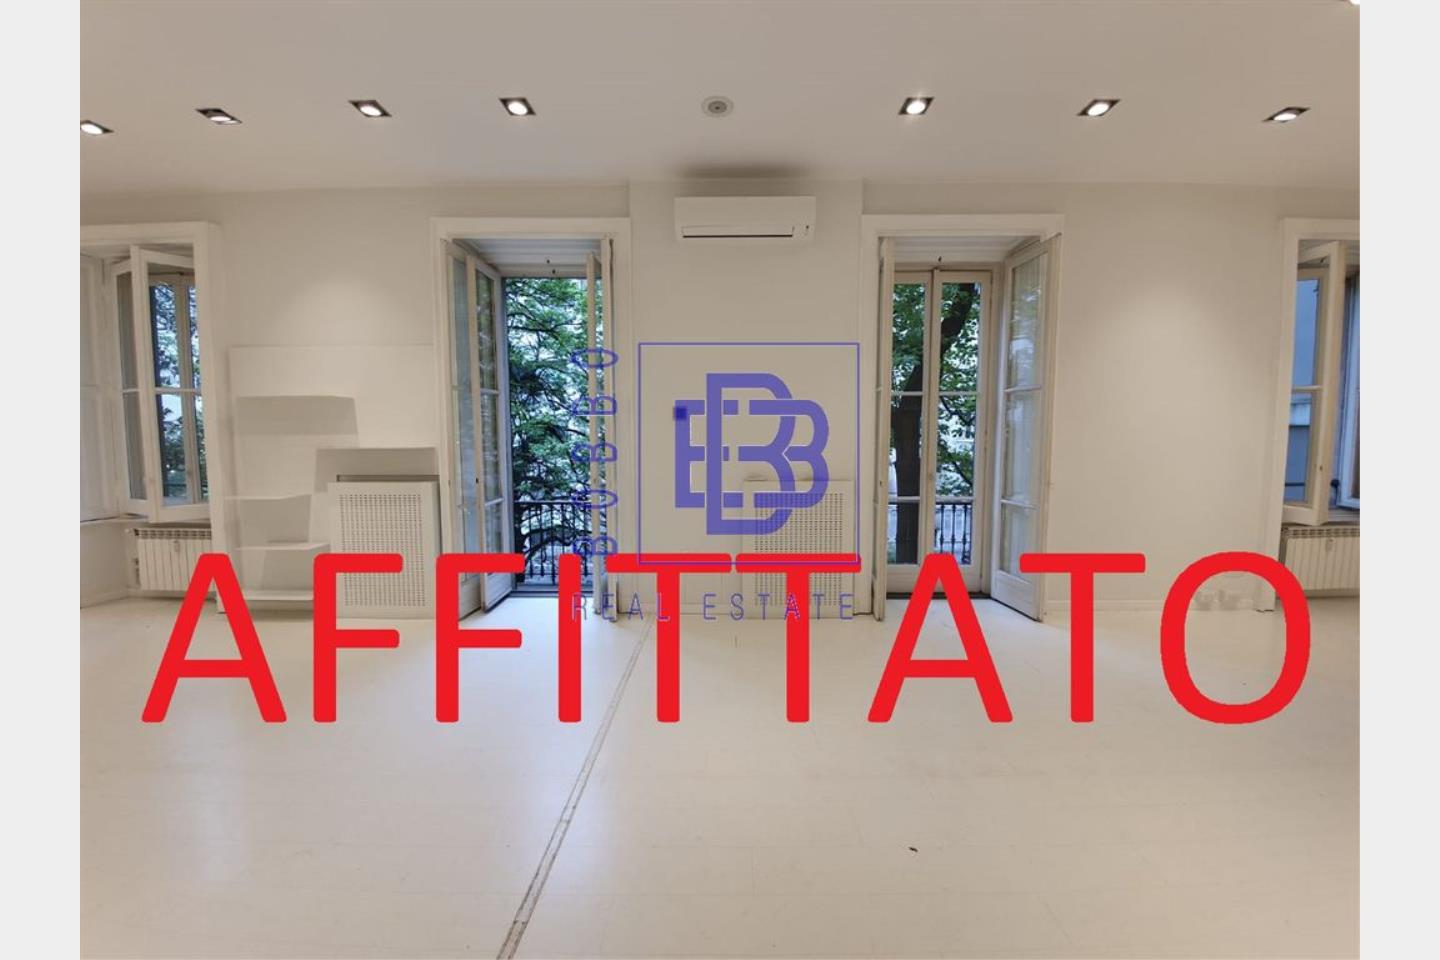 Showroom in Affitto Milano